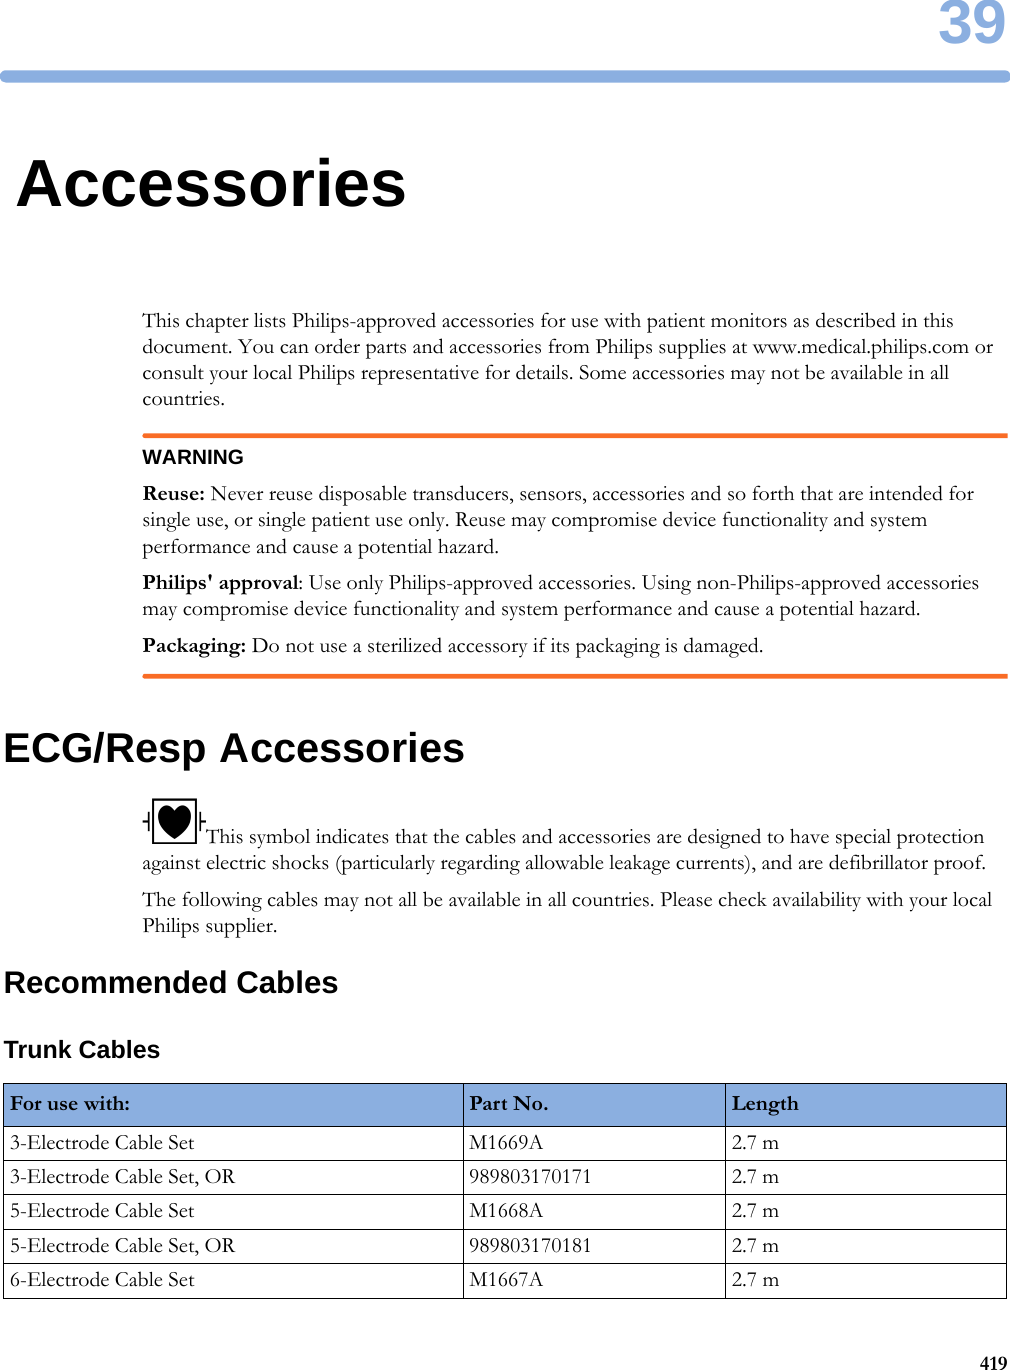 3941939AccessoriesThis chapter lists Philips-approved accessories for use with patient monitors as described in this document. You can order parts and accessories from Philips supplies at www.medical.philips.com or consult your local Philips representative for details. Some accessories may not be available in all countries.WARNINGReuse: Never reuse disposable transducers, sensors, accessories and so forth that are intended for single use, or single patient use only. Reuse may compromise device functionality and system performance and cause a potential hazard.Philips&apos; approval: Use only Philips-approved accessories. Using non-Philips-approved accessories may compromise device functionality and system performance and cause a potential hazard.Packaging: Do not use a sterilized accessory if its packaging is damaged.ECG/Resp AccessoriesThis symbol indicates that the cables and accessories are designed to have special protection against electric shocks (particularly regarding allowable leakage currents), and are defibrillator proof.The following cables may not all be available in all countries. Please check availability with your local Philips supplier.Recommended CablesTrunk CablesFor use with: Part No. Length3-Electrode Cable Set M1669A 2.7 m3-Electrode Cable Set, OR 989803170171 2.7 m5-Electrode Cable Set M1668A 2.7 m5-Electrode Cable Set, OR 989803170181 2.7 m6-Electrode Cable Set M1667A 2.7 m